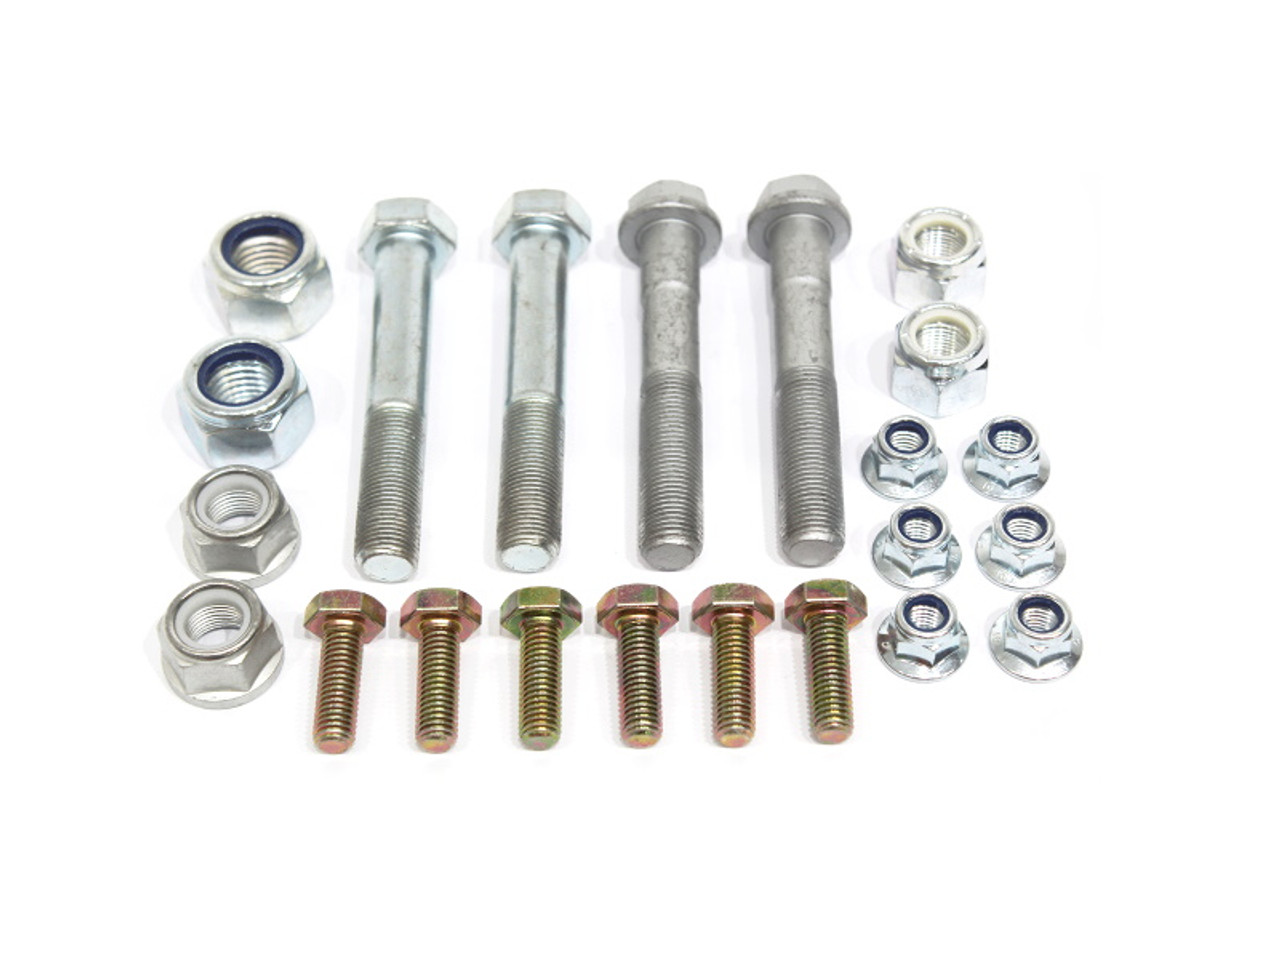 Allmakes 4X4 Rear A Frame and Radius Arm Fitting Kit From 2000 - GA7208